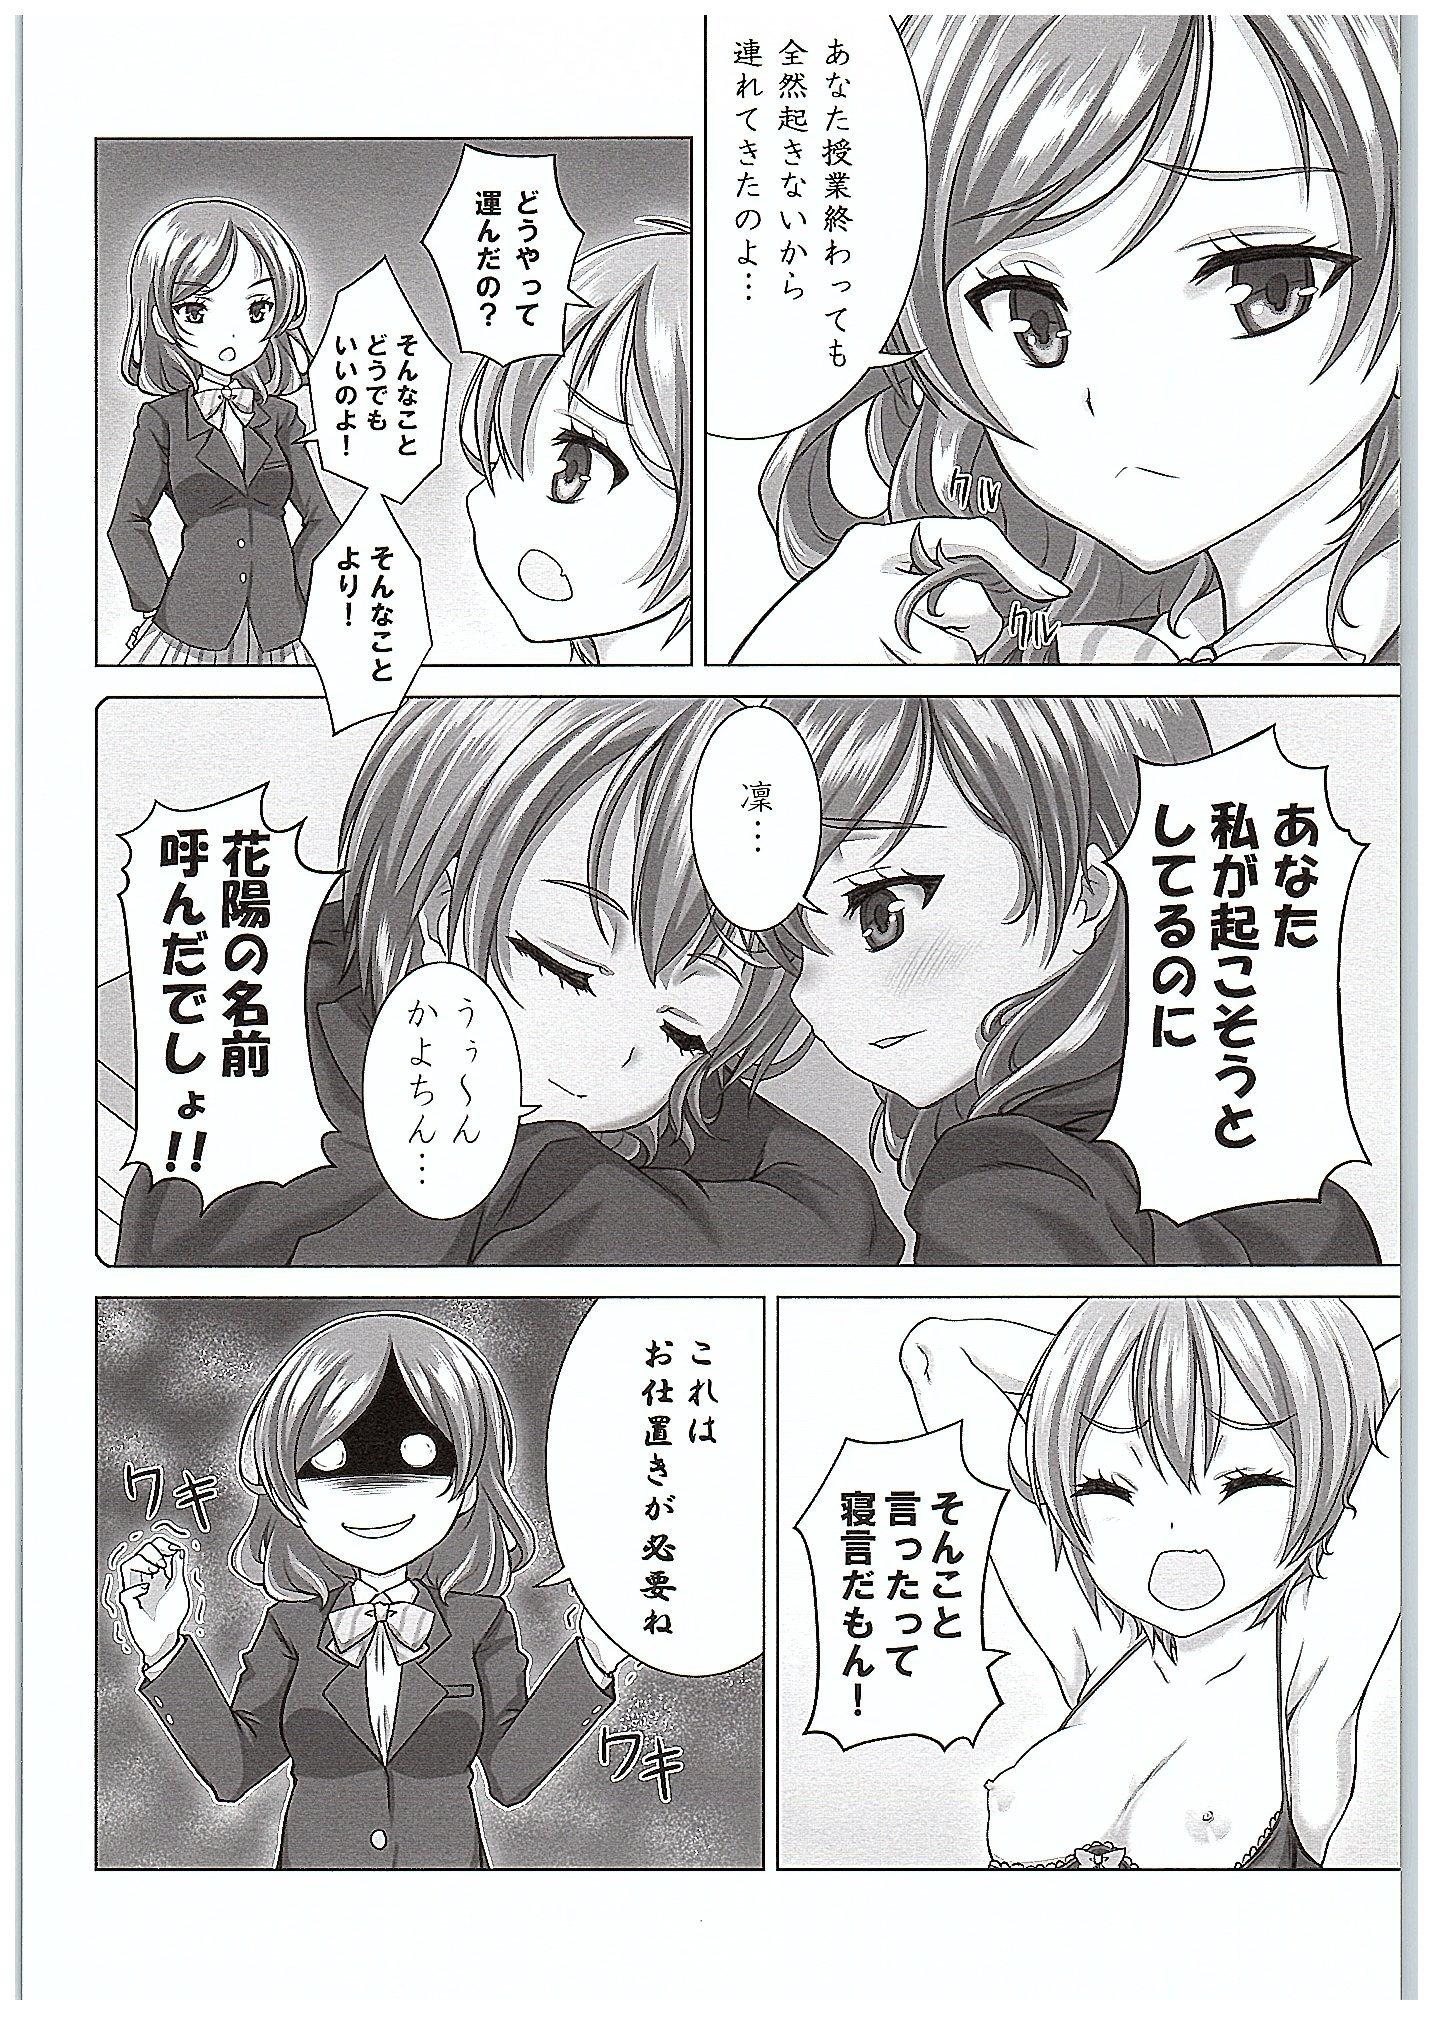 Licking Pussy Rin-chan de Asobou! - Love live This - Page 5